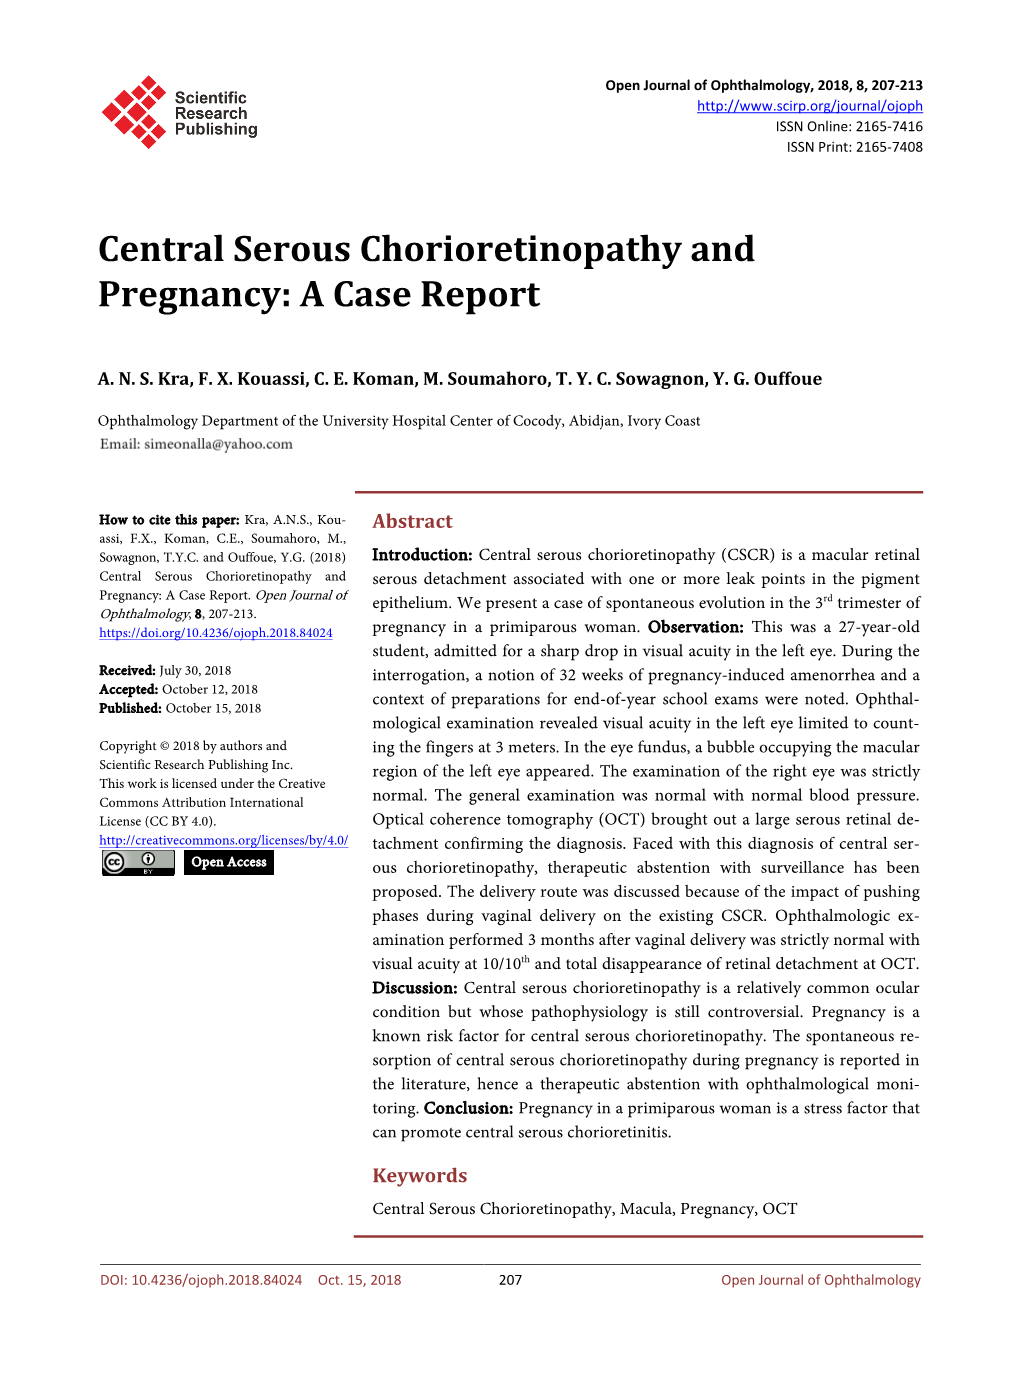 Central Serous Chorioretinopathy and Pregnancy: a Case Report